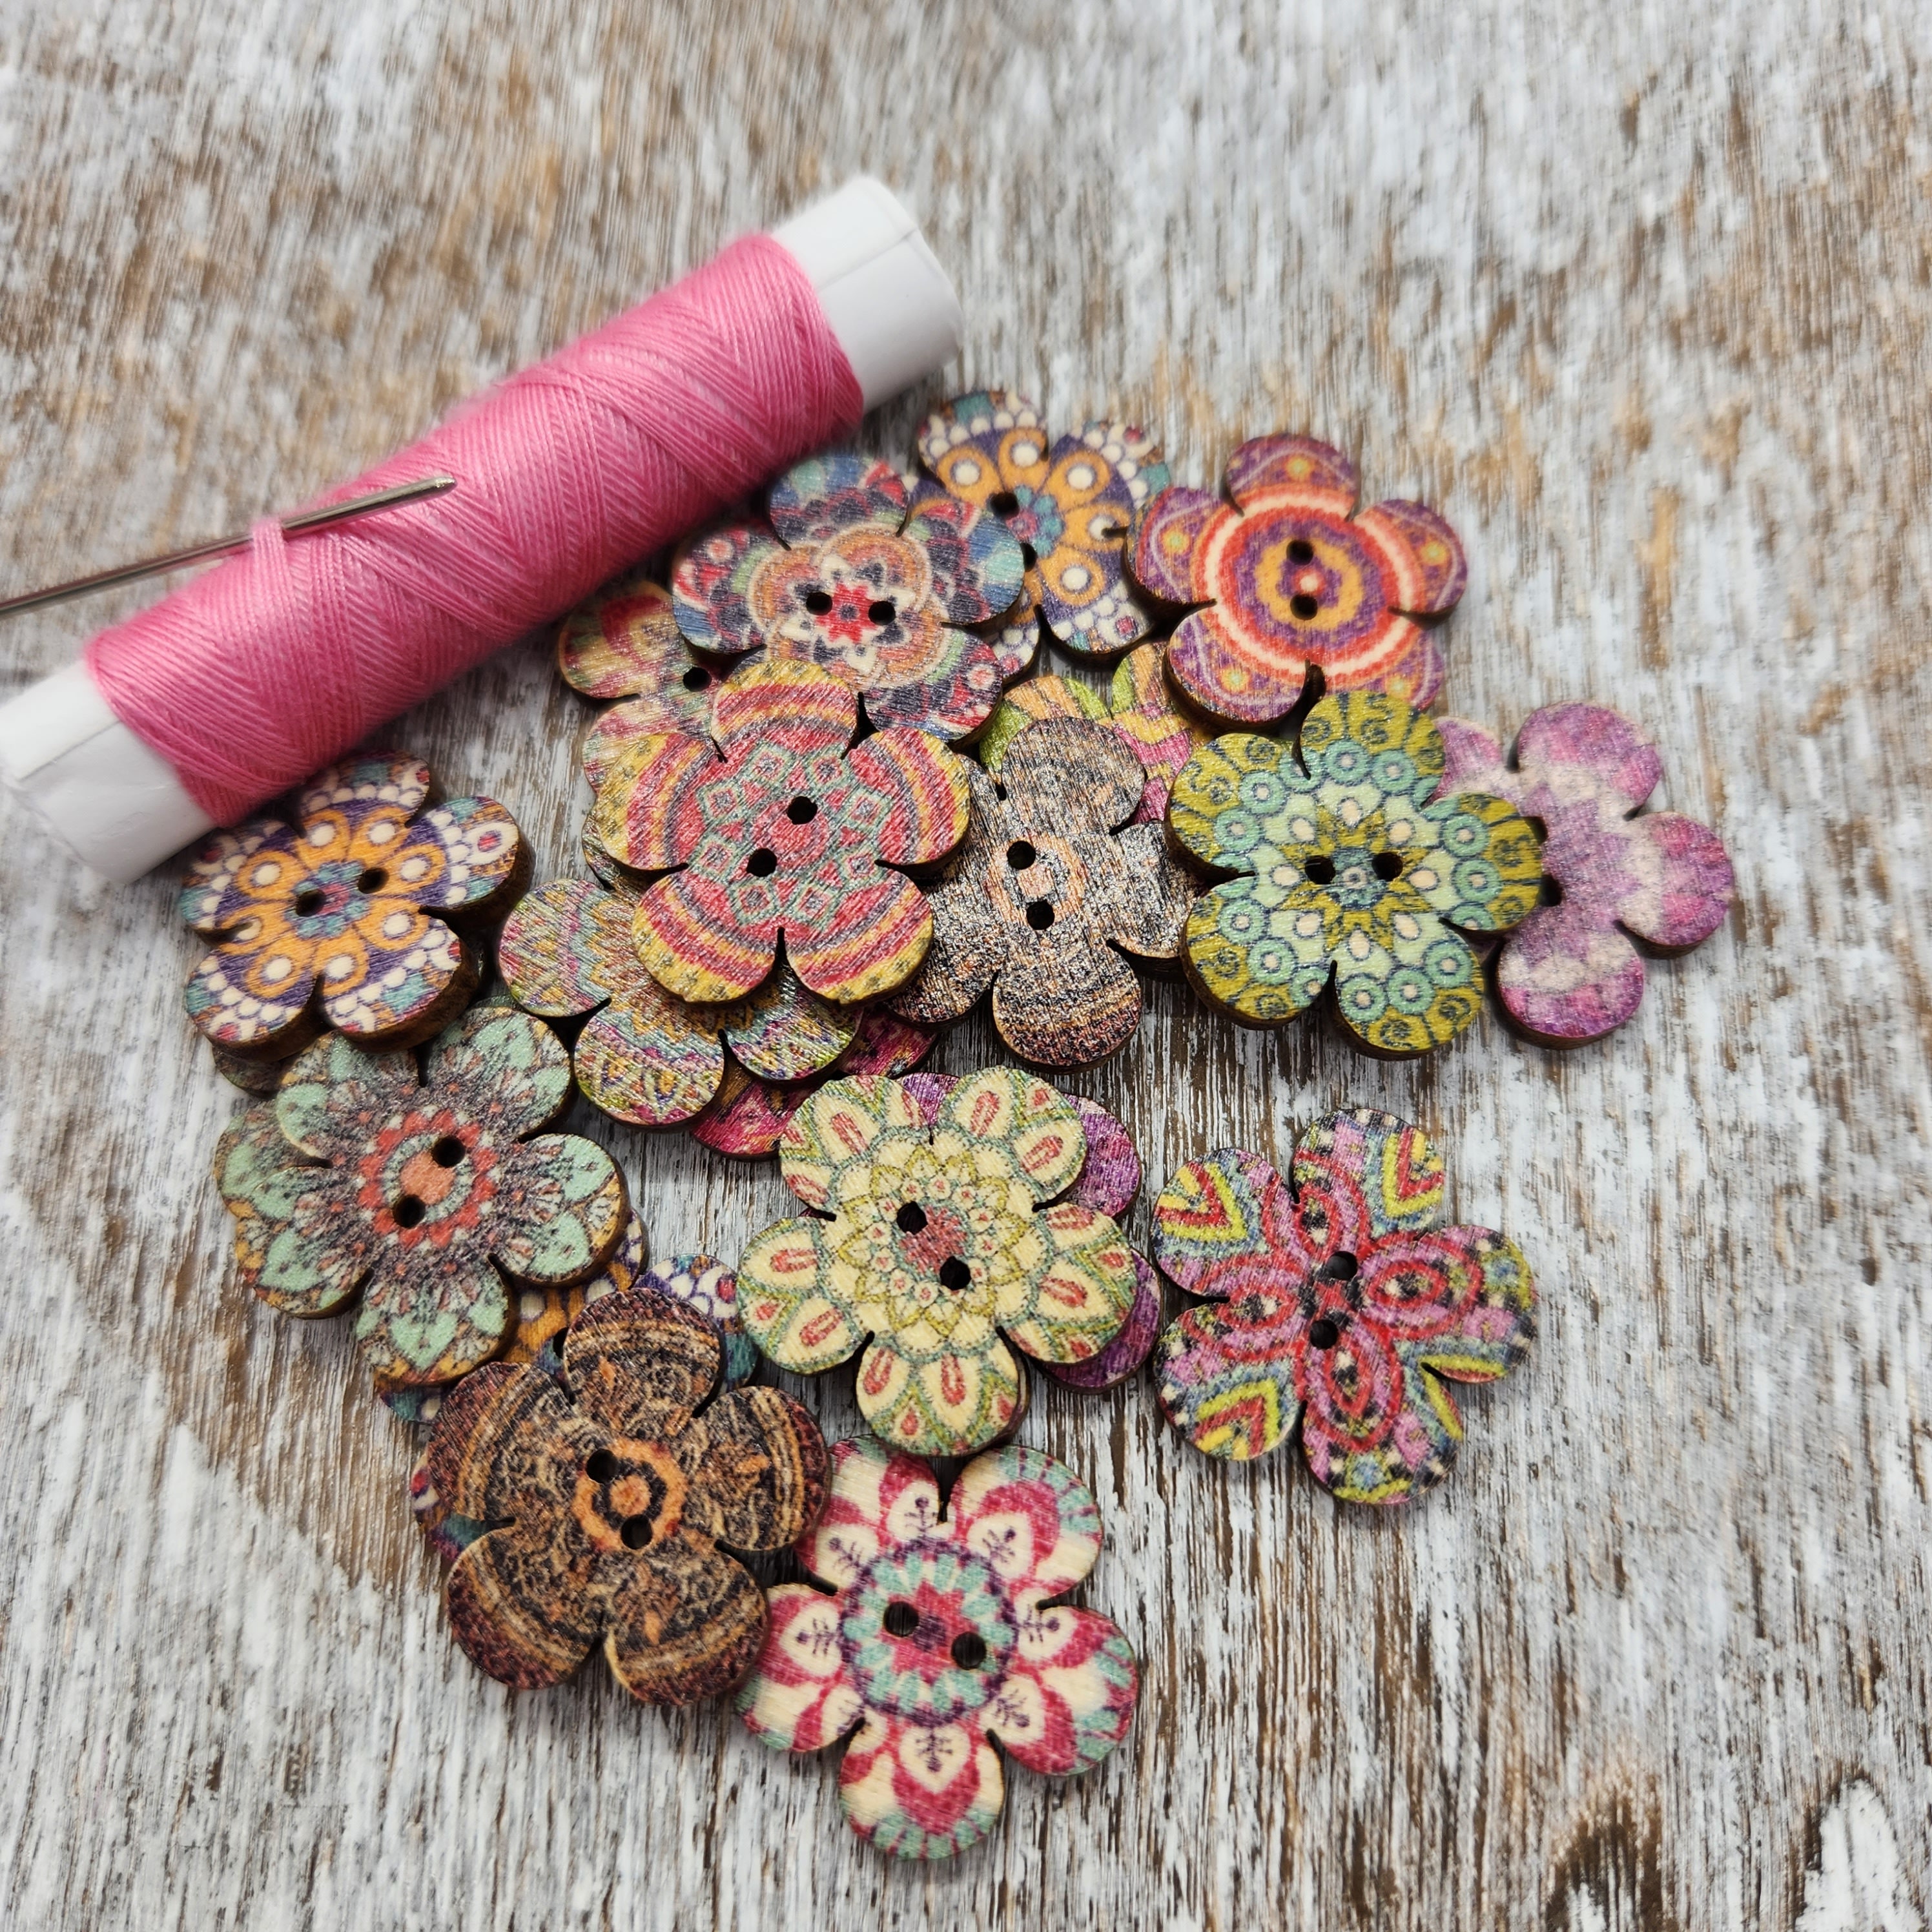 Mixed Colors Cute Flower Shape Small Buttons For Children's